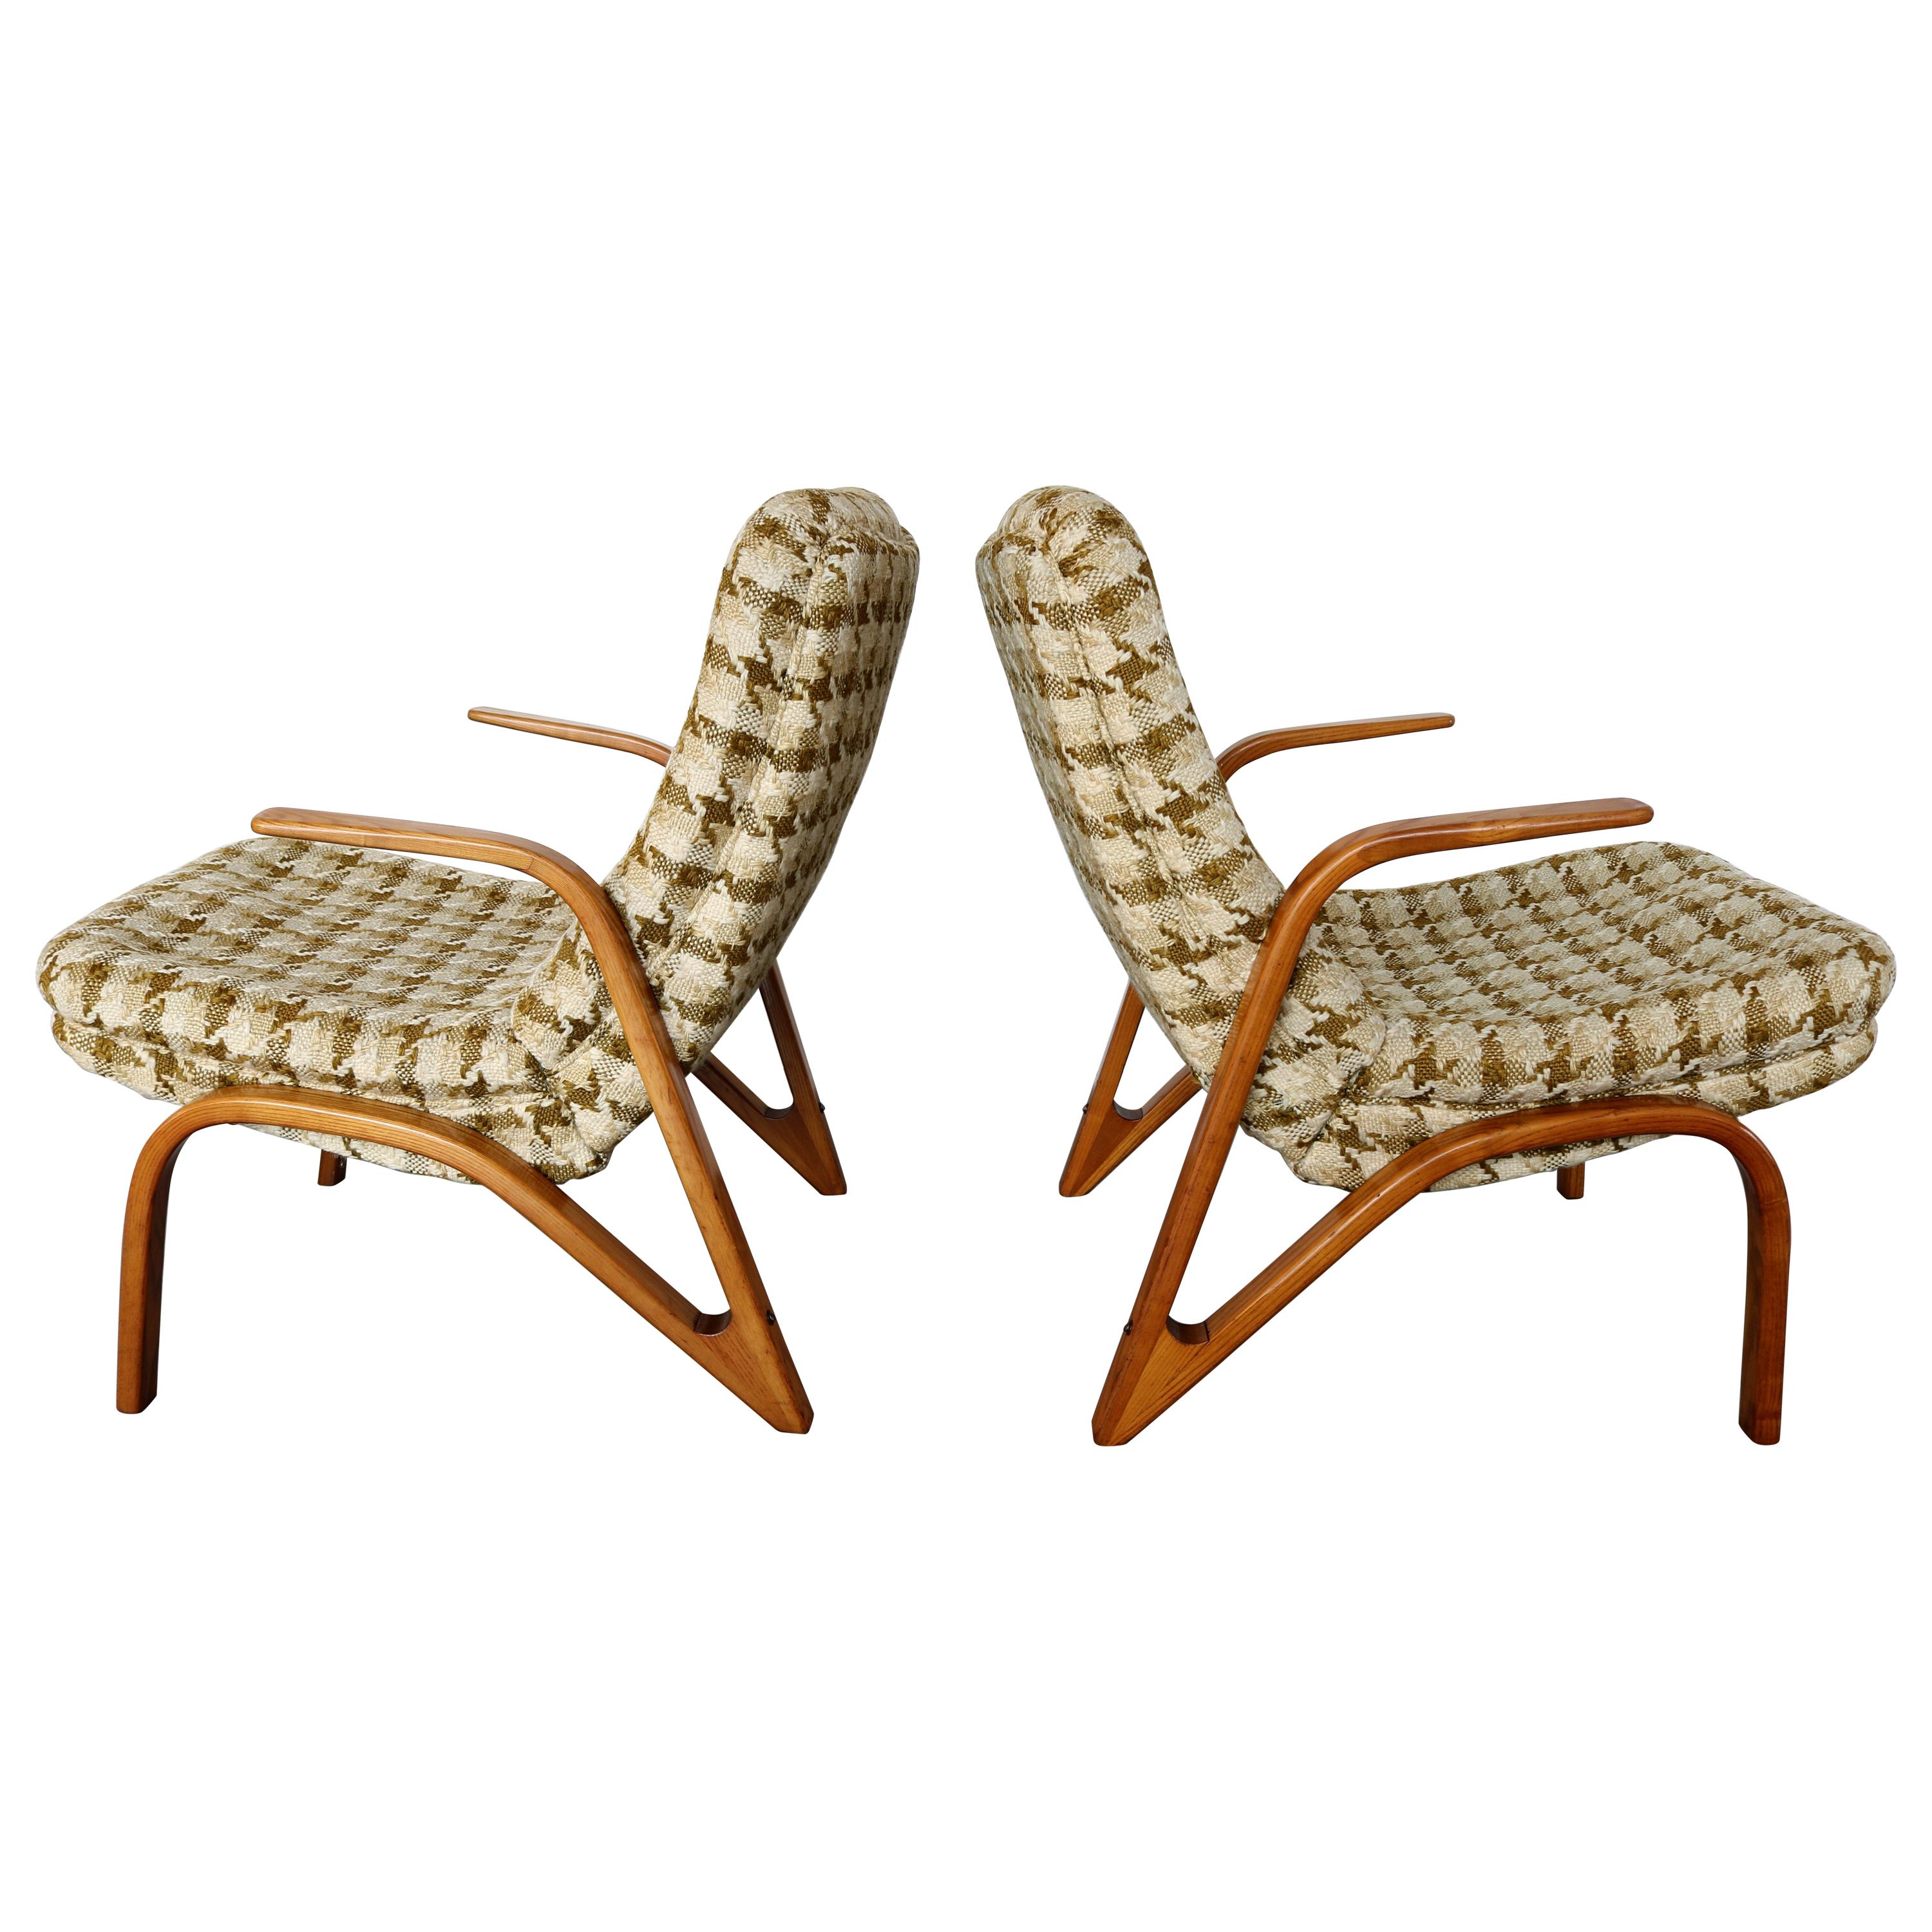 Set of 2 "Konkav" Lounge Chairs by Paul Bode Made in Germany, 1950s For Sale